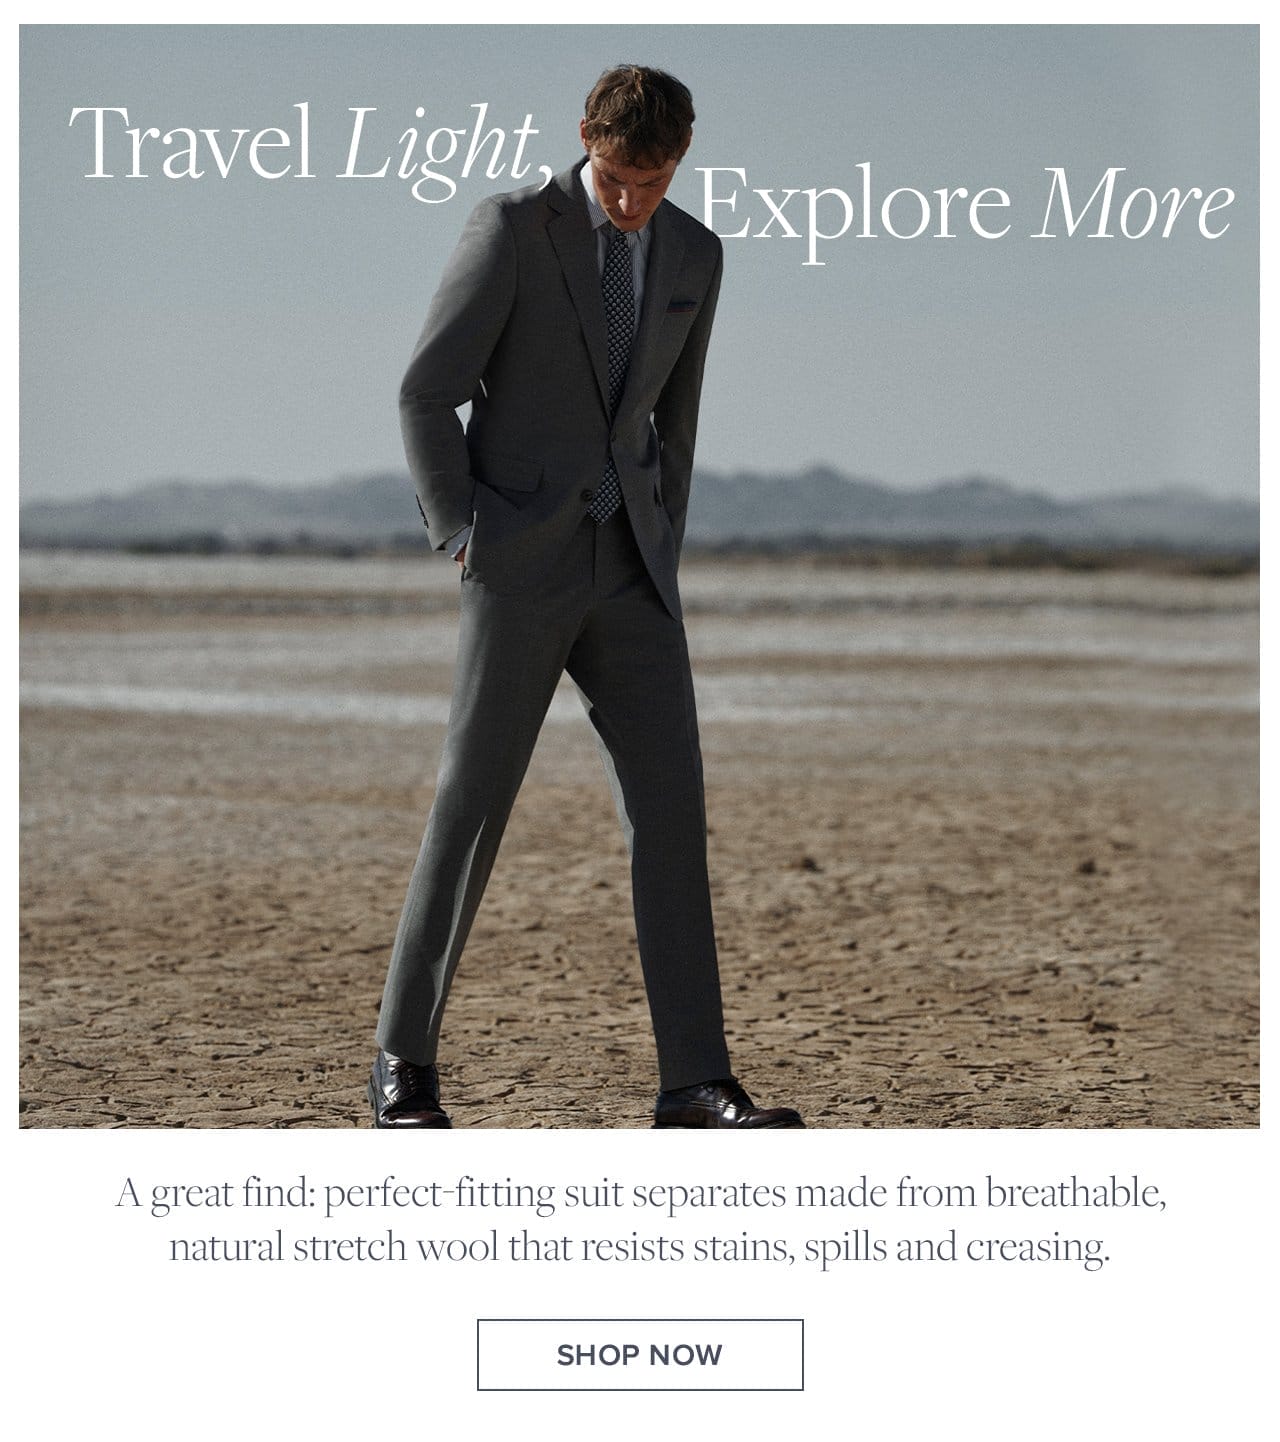 Travel Light, Explore More A great find: perfect-fitting suit separates made from breathable, natural stretch wool that resists stains, spills and creasing. Shop Now